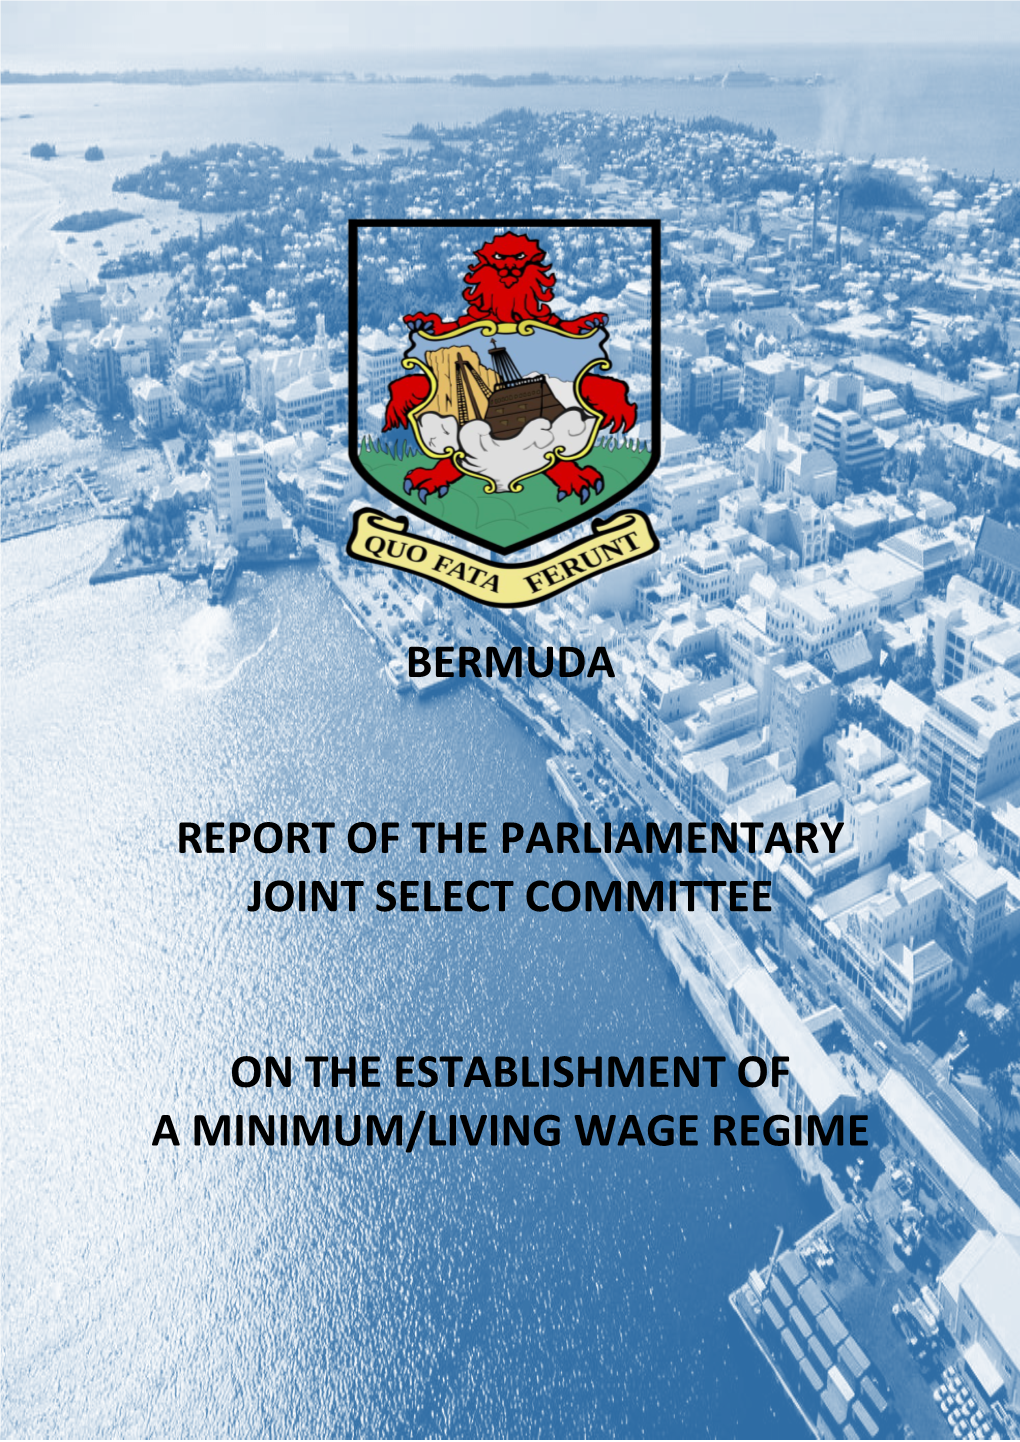 Bermuda Report of the Parliamentary Joint Select Committee on the Establishment of a Minimum/Living Wage Regime